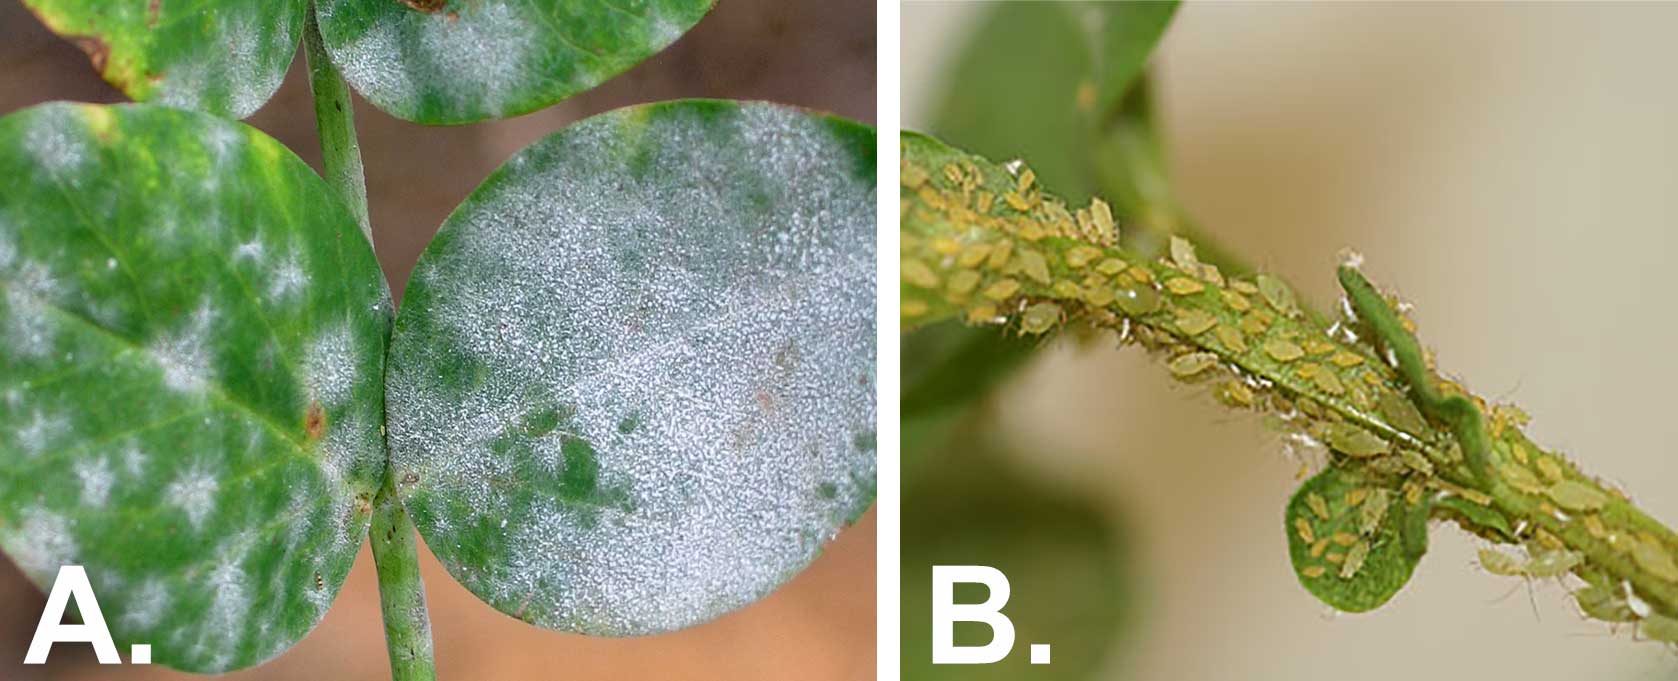 Two photos of common pea issues. The first is labeled &quot;A&quot; and shows white, powdery residue on pea leaves due to powdery mildew. The second is labeled &quot;B&quot; and shows numerous, small, lime-green pea aphids on a pea stem.